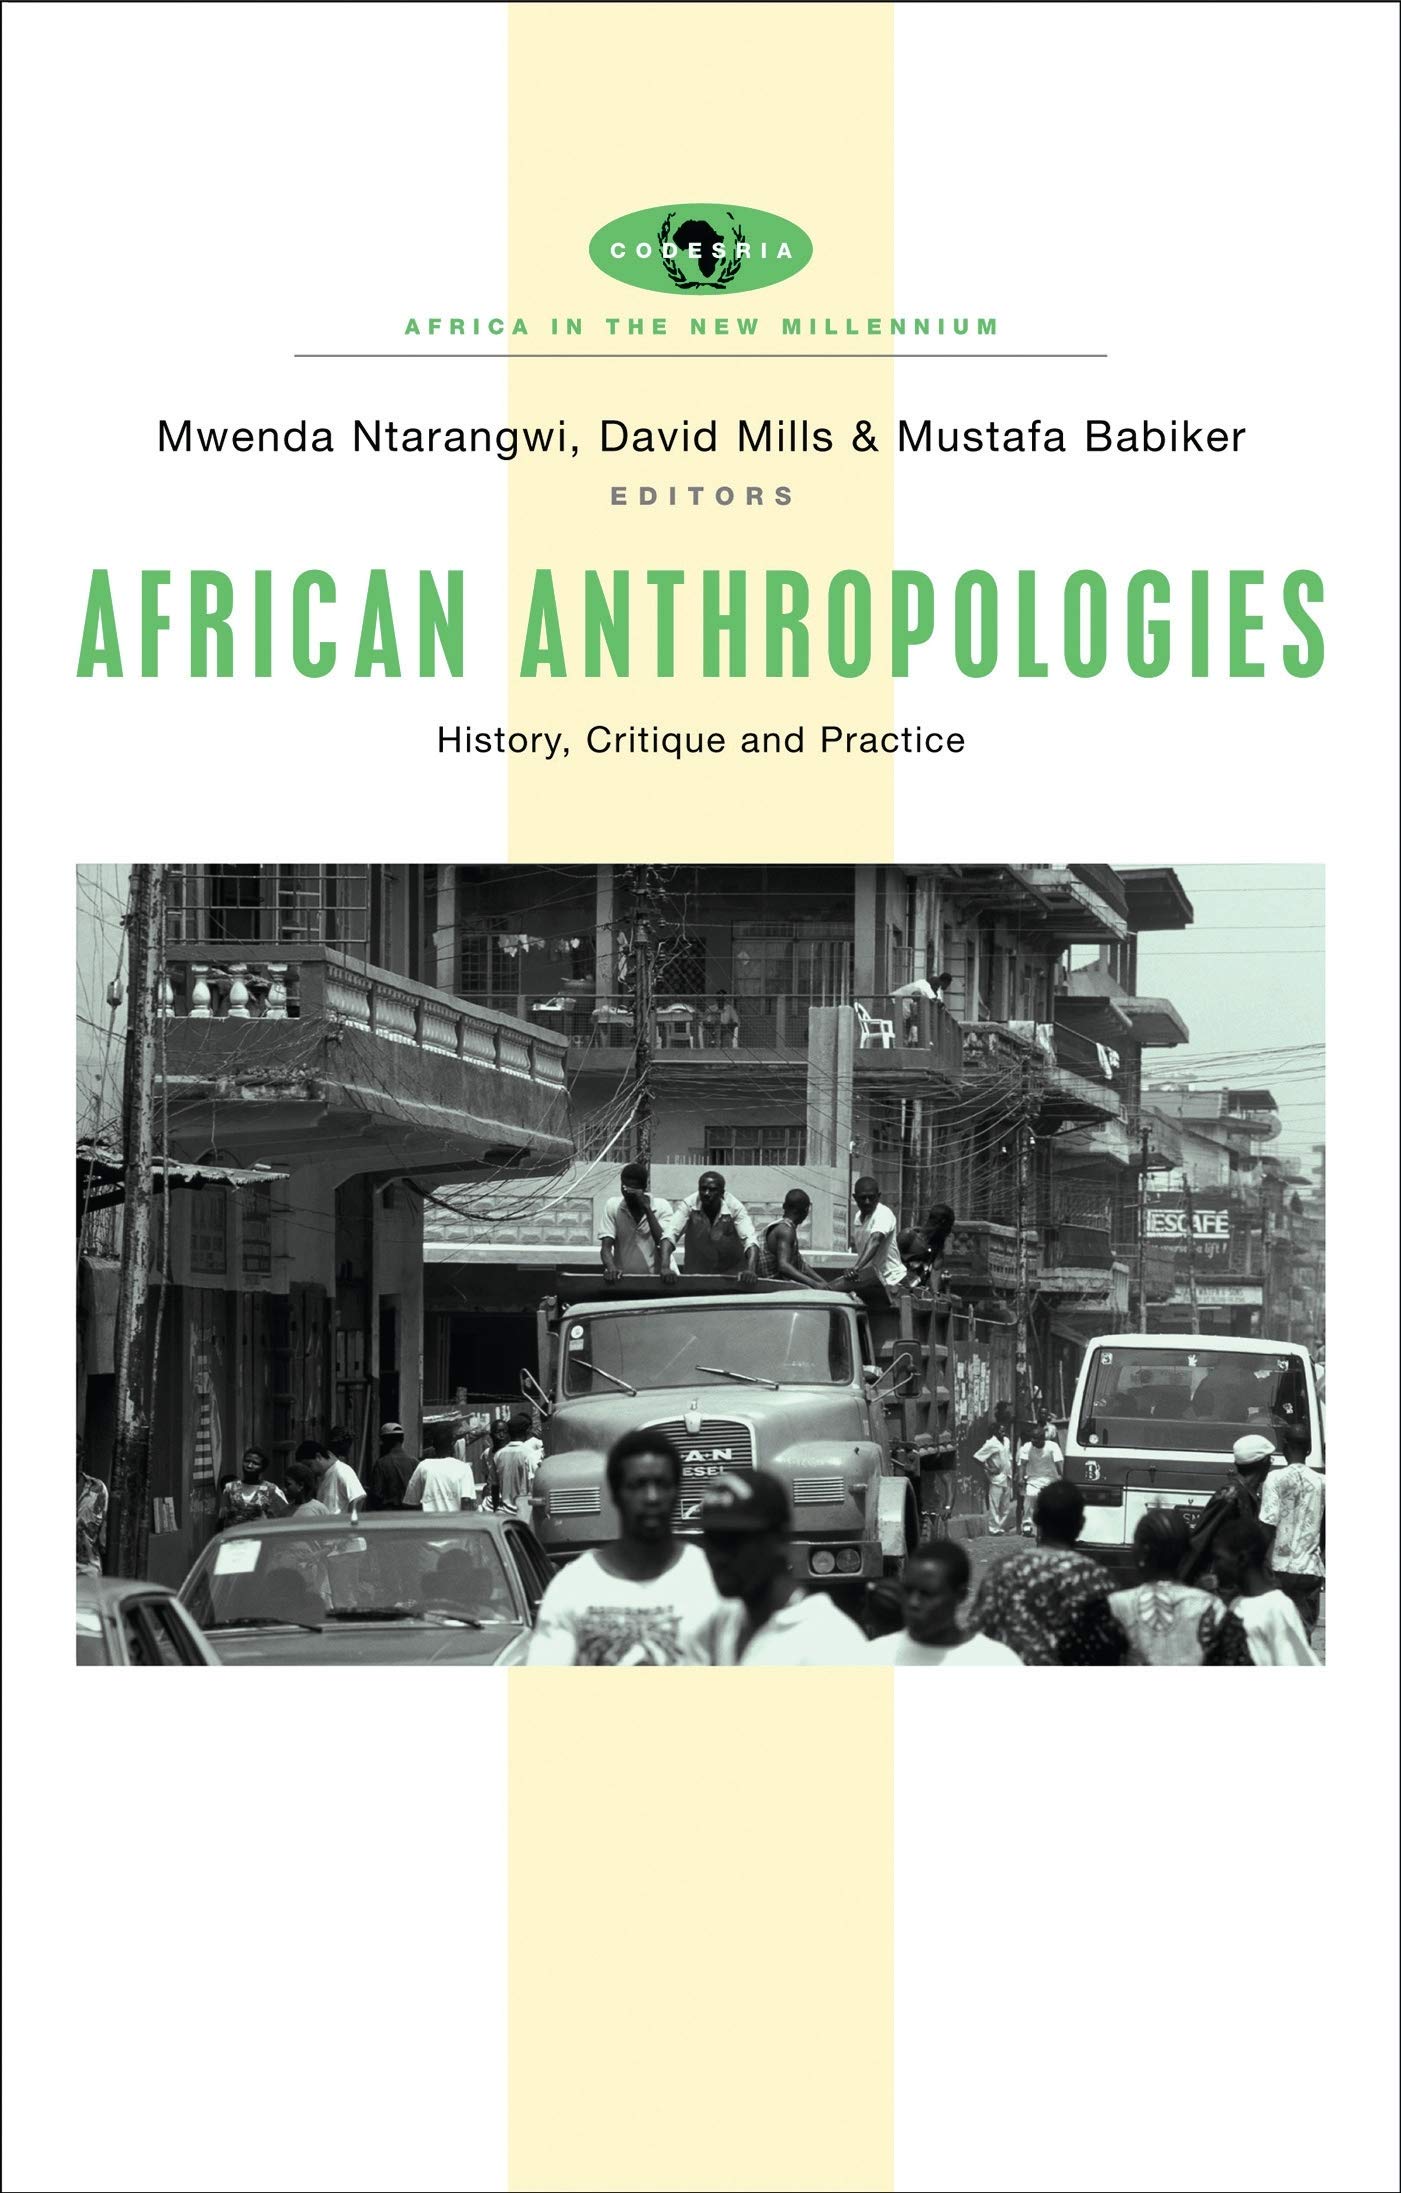 African Anthropologies: History, Critique and Practice (Africa in the New Millennium)